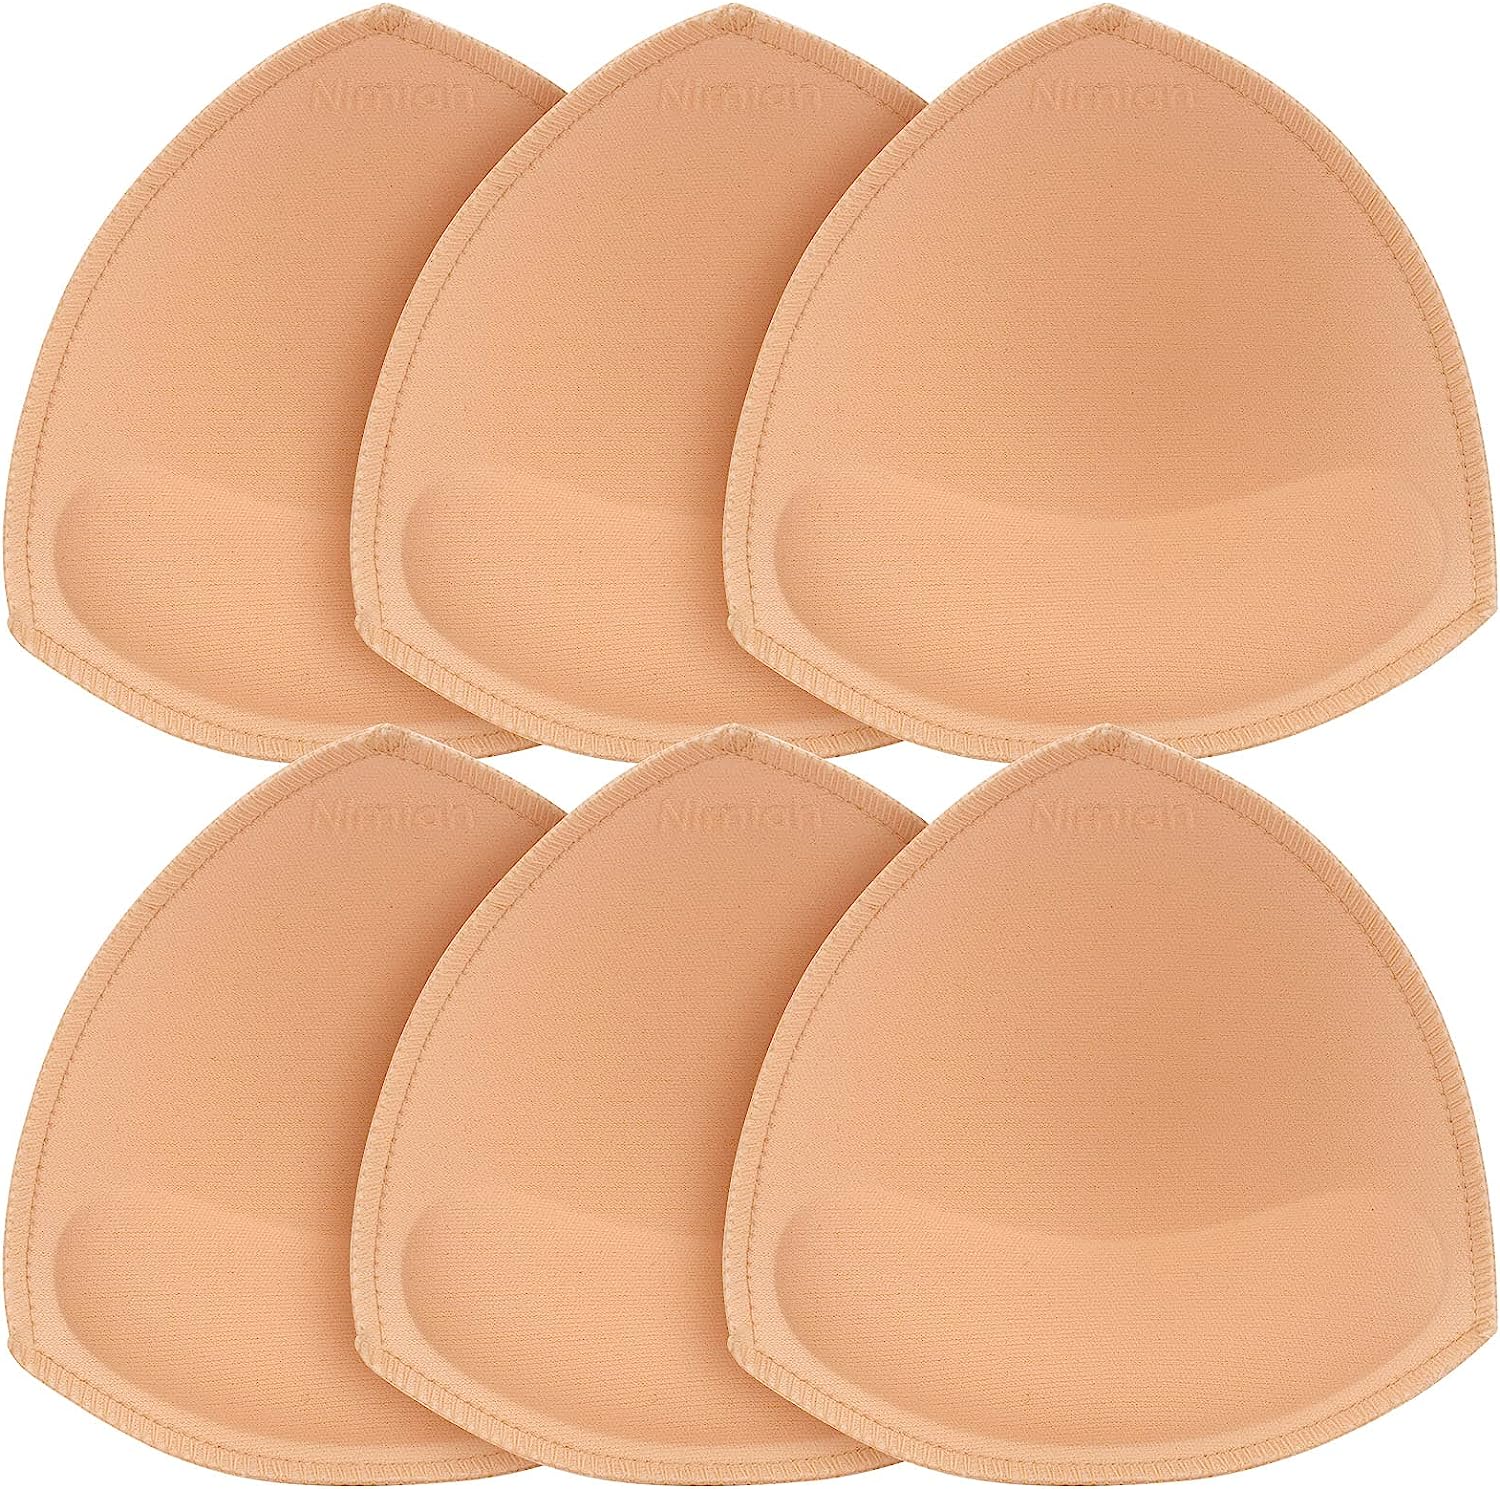 DAYKIT 3 Pairs Removeable Push up Triangle Bra Pads Inserts for